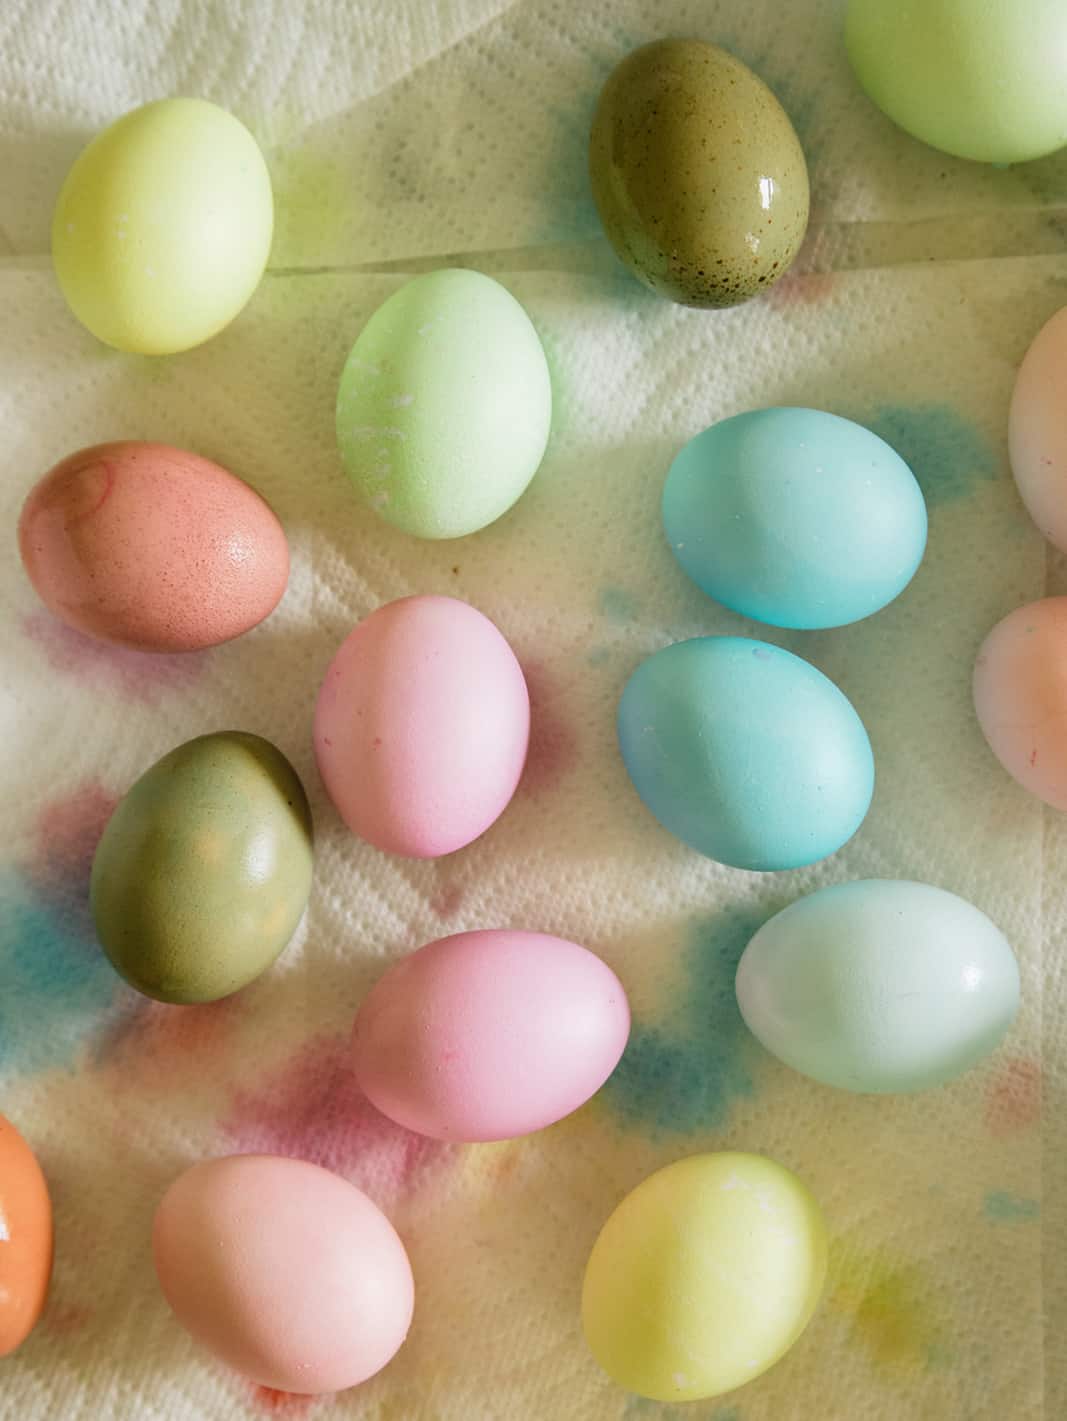 A close up of dyed Easter eggs in a variety of colors on paper towels.